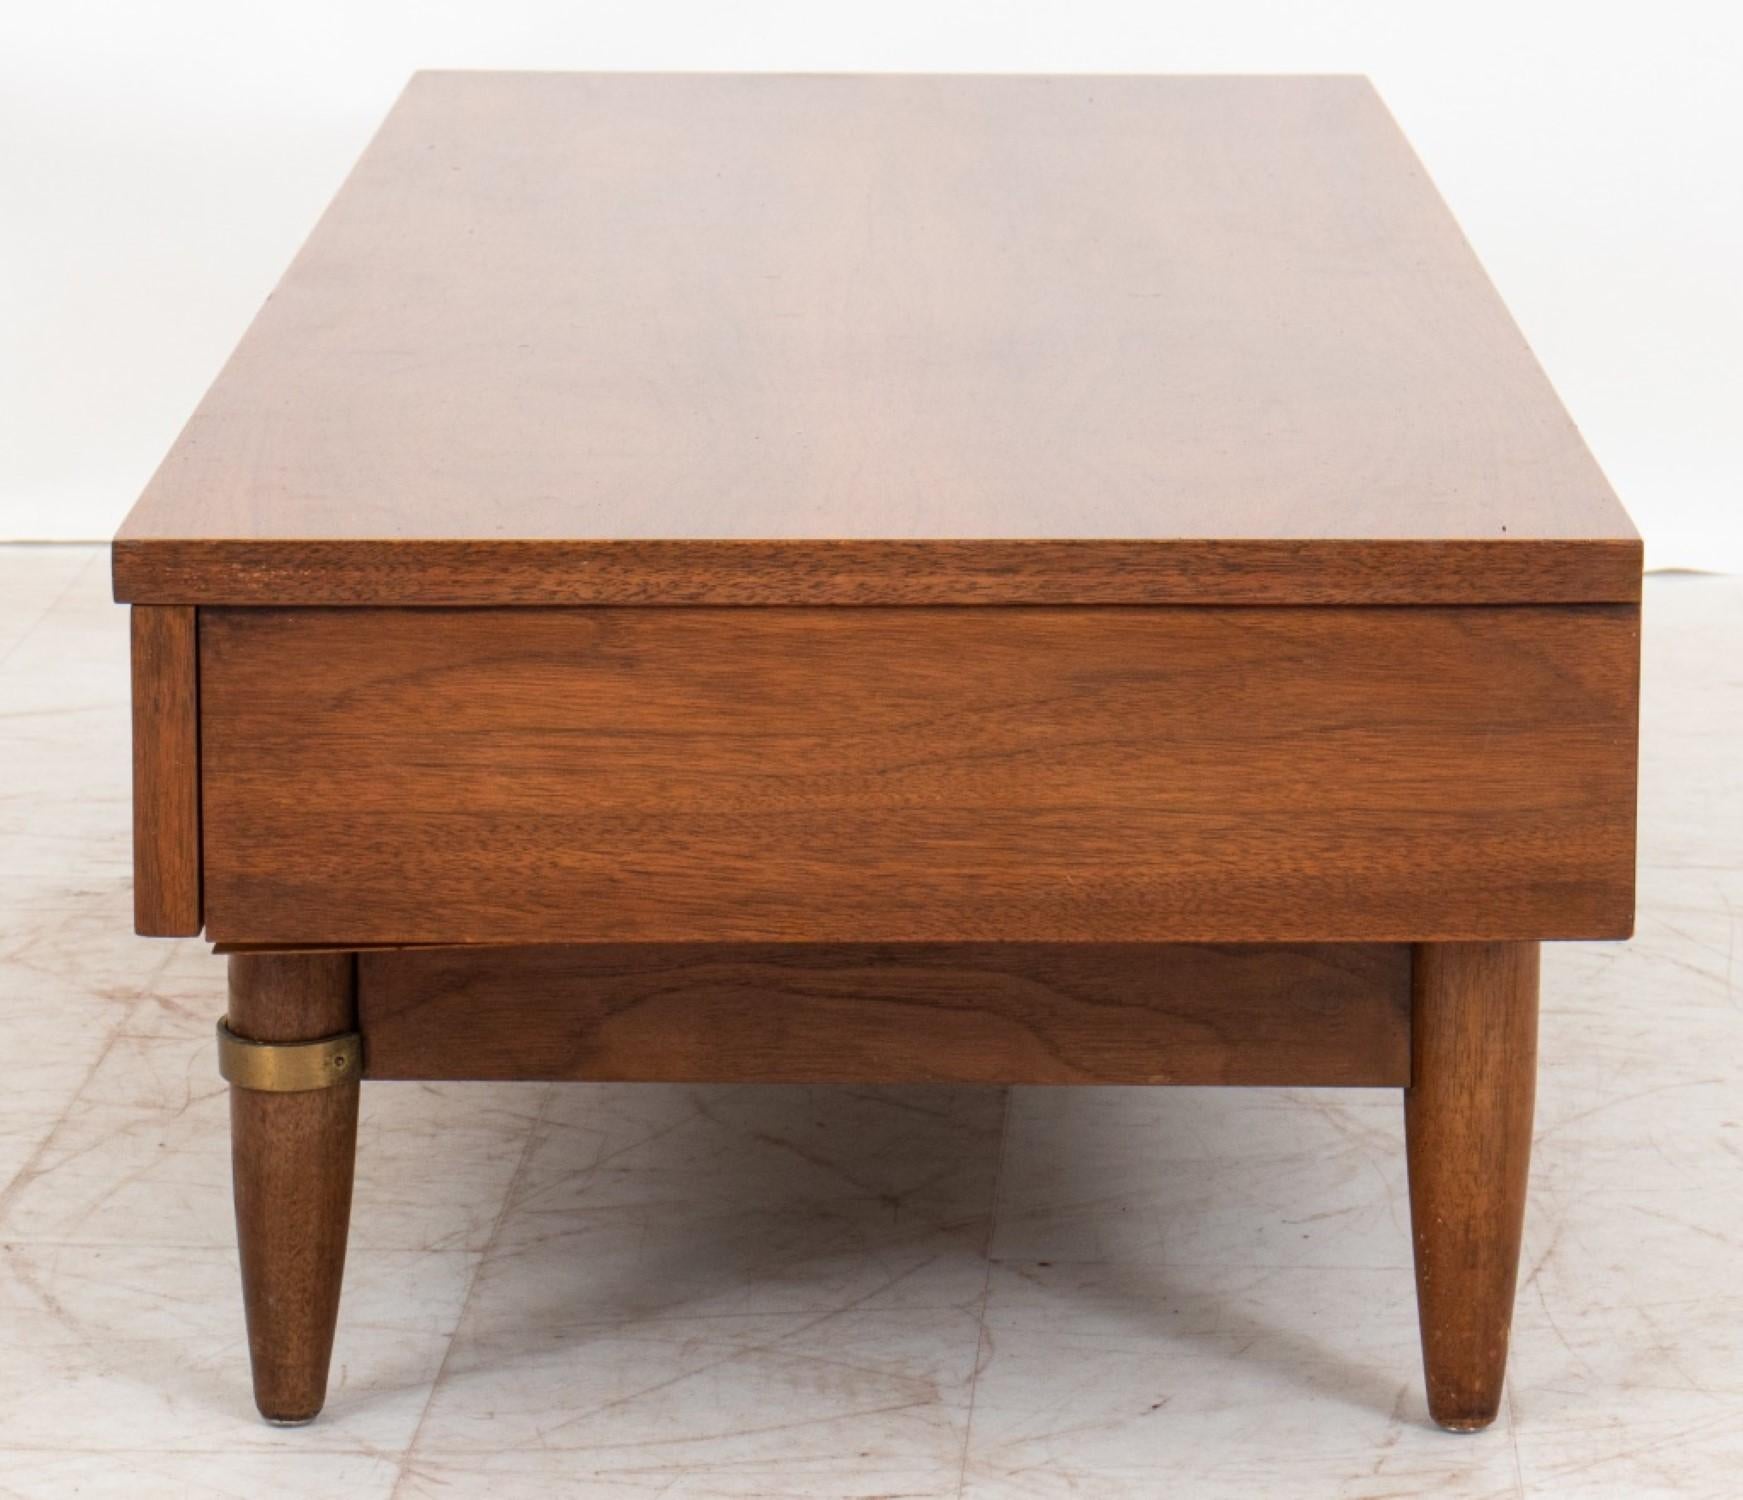 
The dimensions for the American of Martinsville Mid-Century Modern Low Table or TV stand in walnut are approximately:

Height: 13 inches
Width: 54 inches
Depth: 18.75 inches